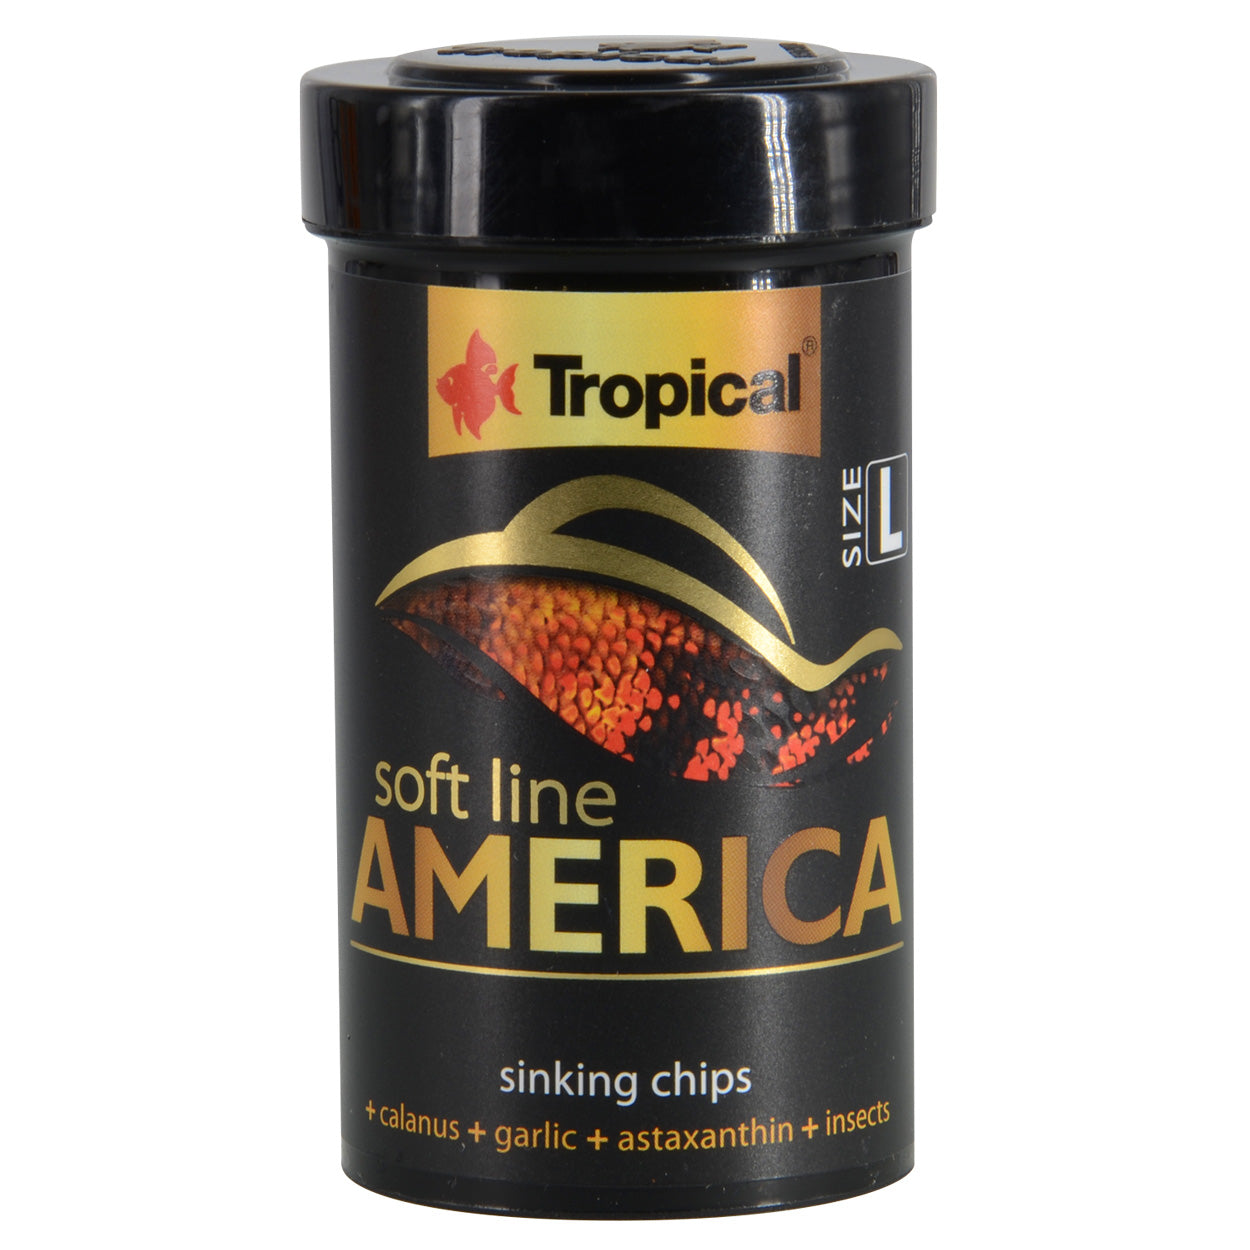 Tropical America Soft Line - Large Sinking Chips 52 gr